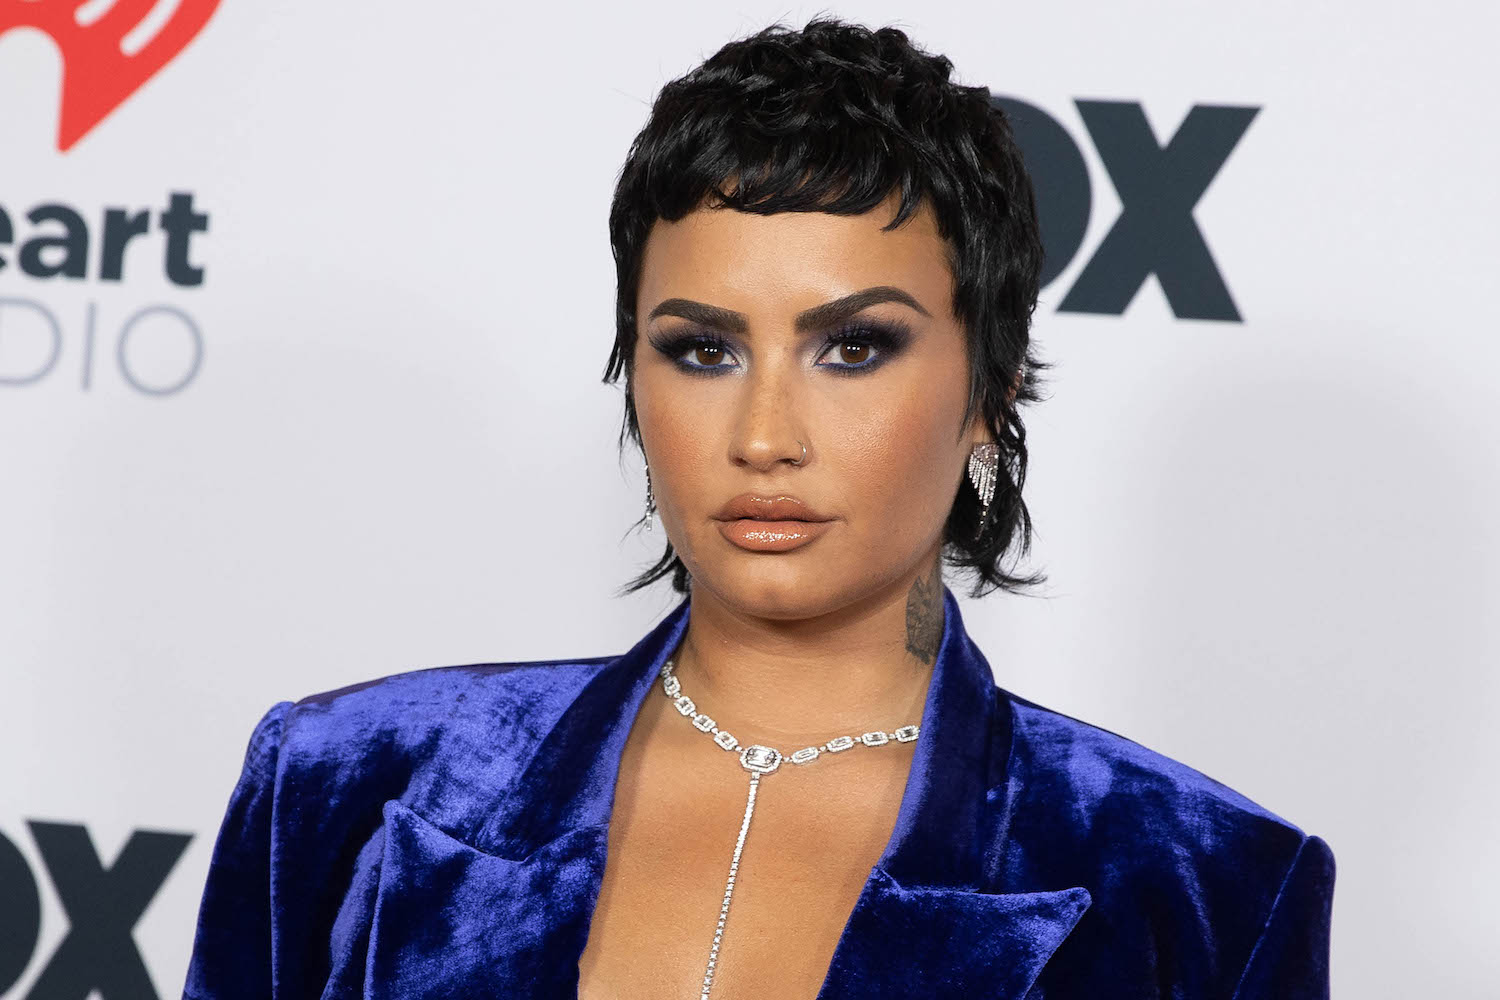 Demi Lovato arrives at the 2021 iHeartRadio Music Awards wearing a vibrant blue jacket